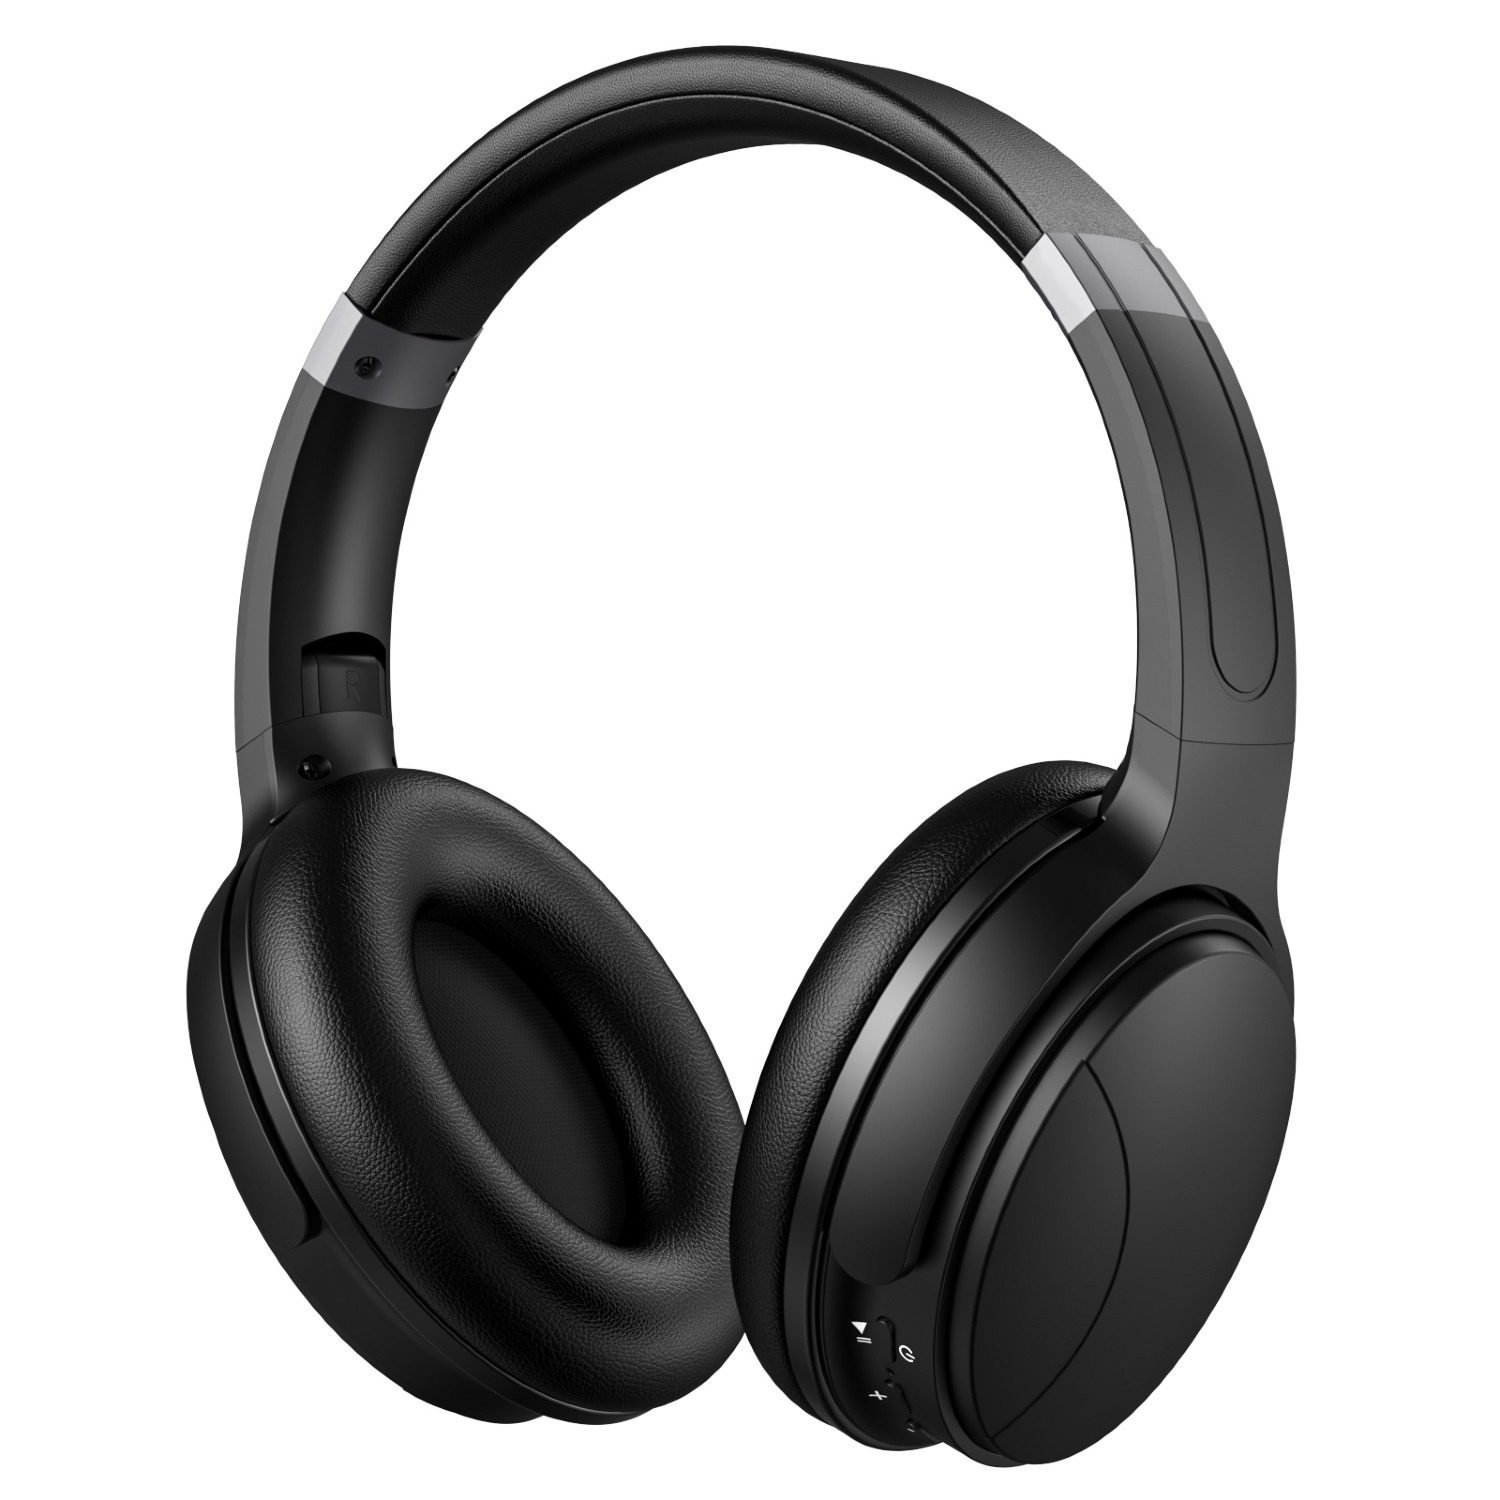 VILINICE Over-Ear Wireless Noise Cancelling Headphones (Black) $17 + Free Shipping w/ Walmart+ or $35+ orders